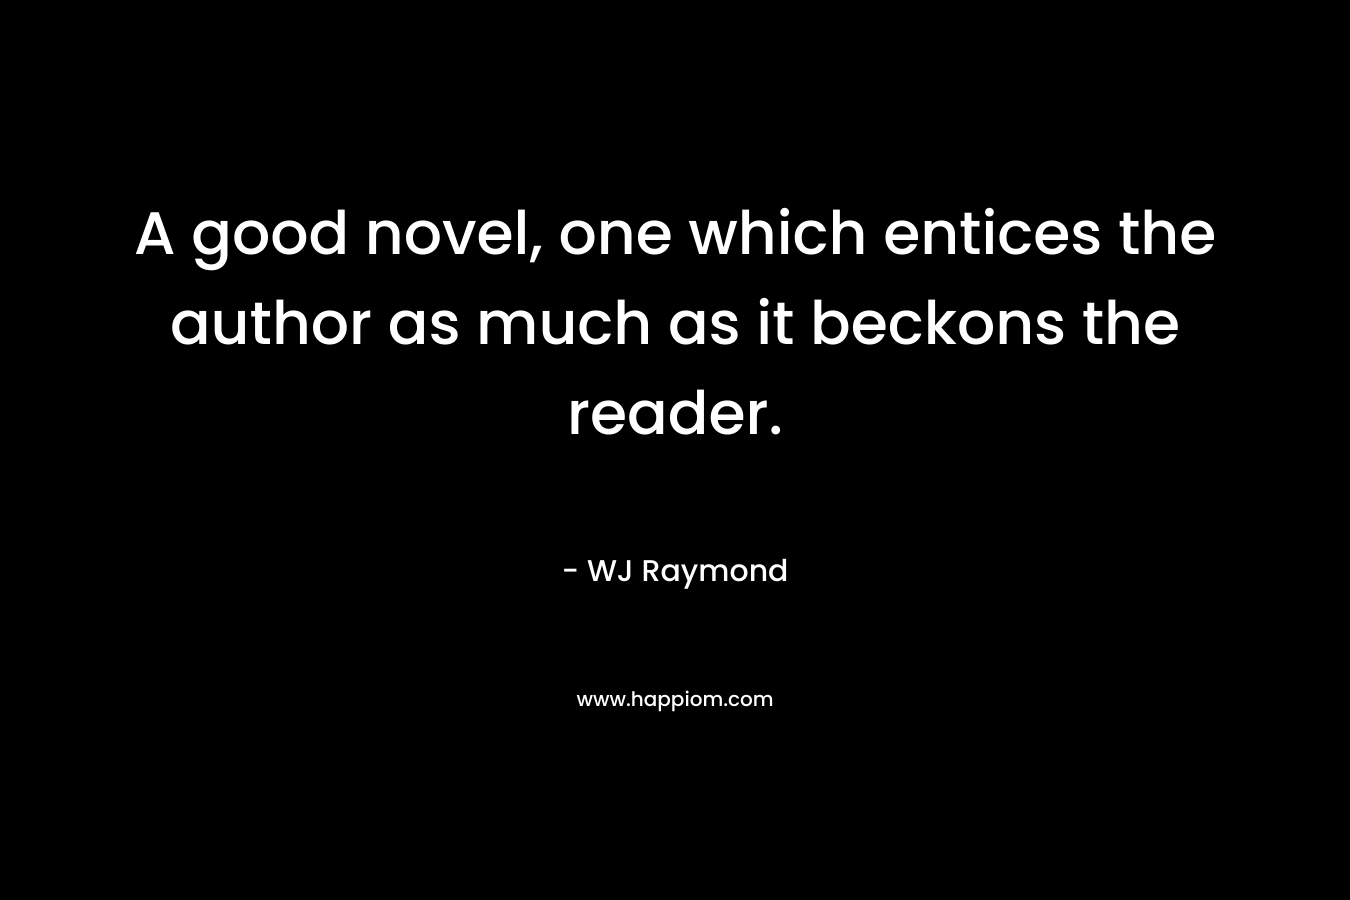 A good novel, one which entices the author as much as it beckons the reader. – WJ Raymond